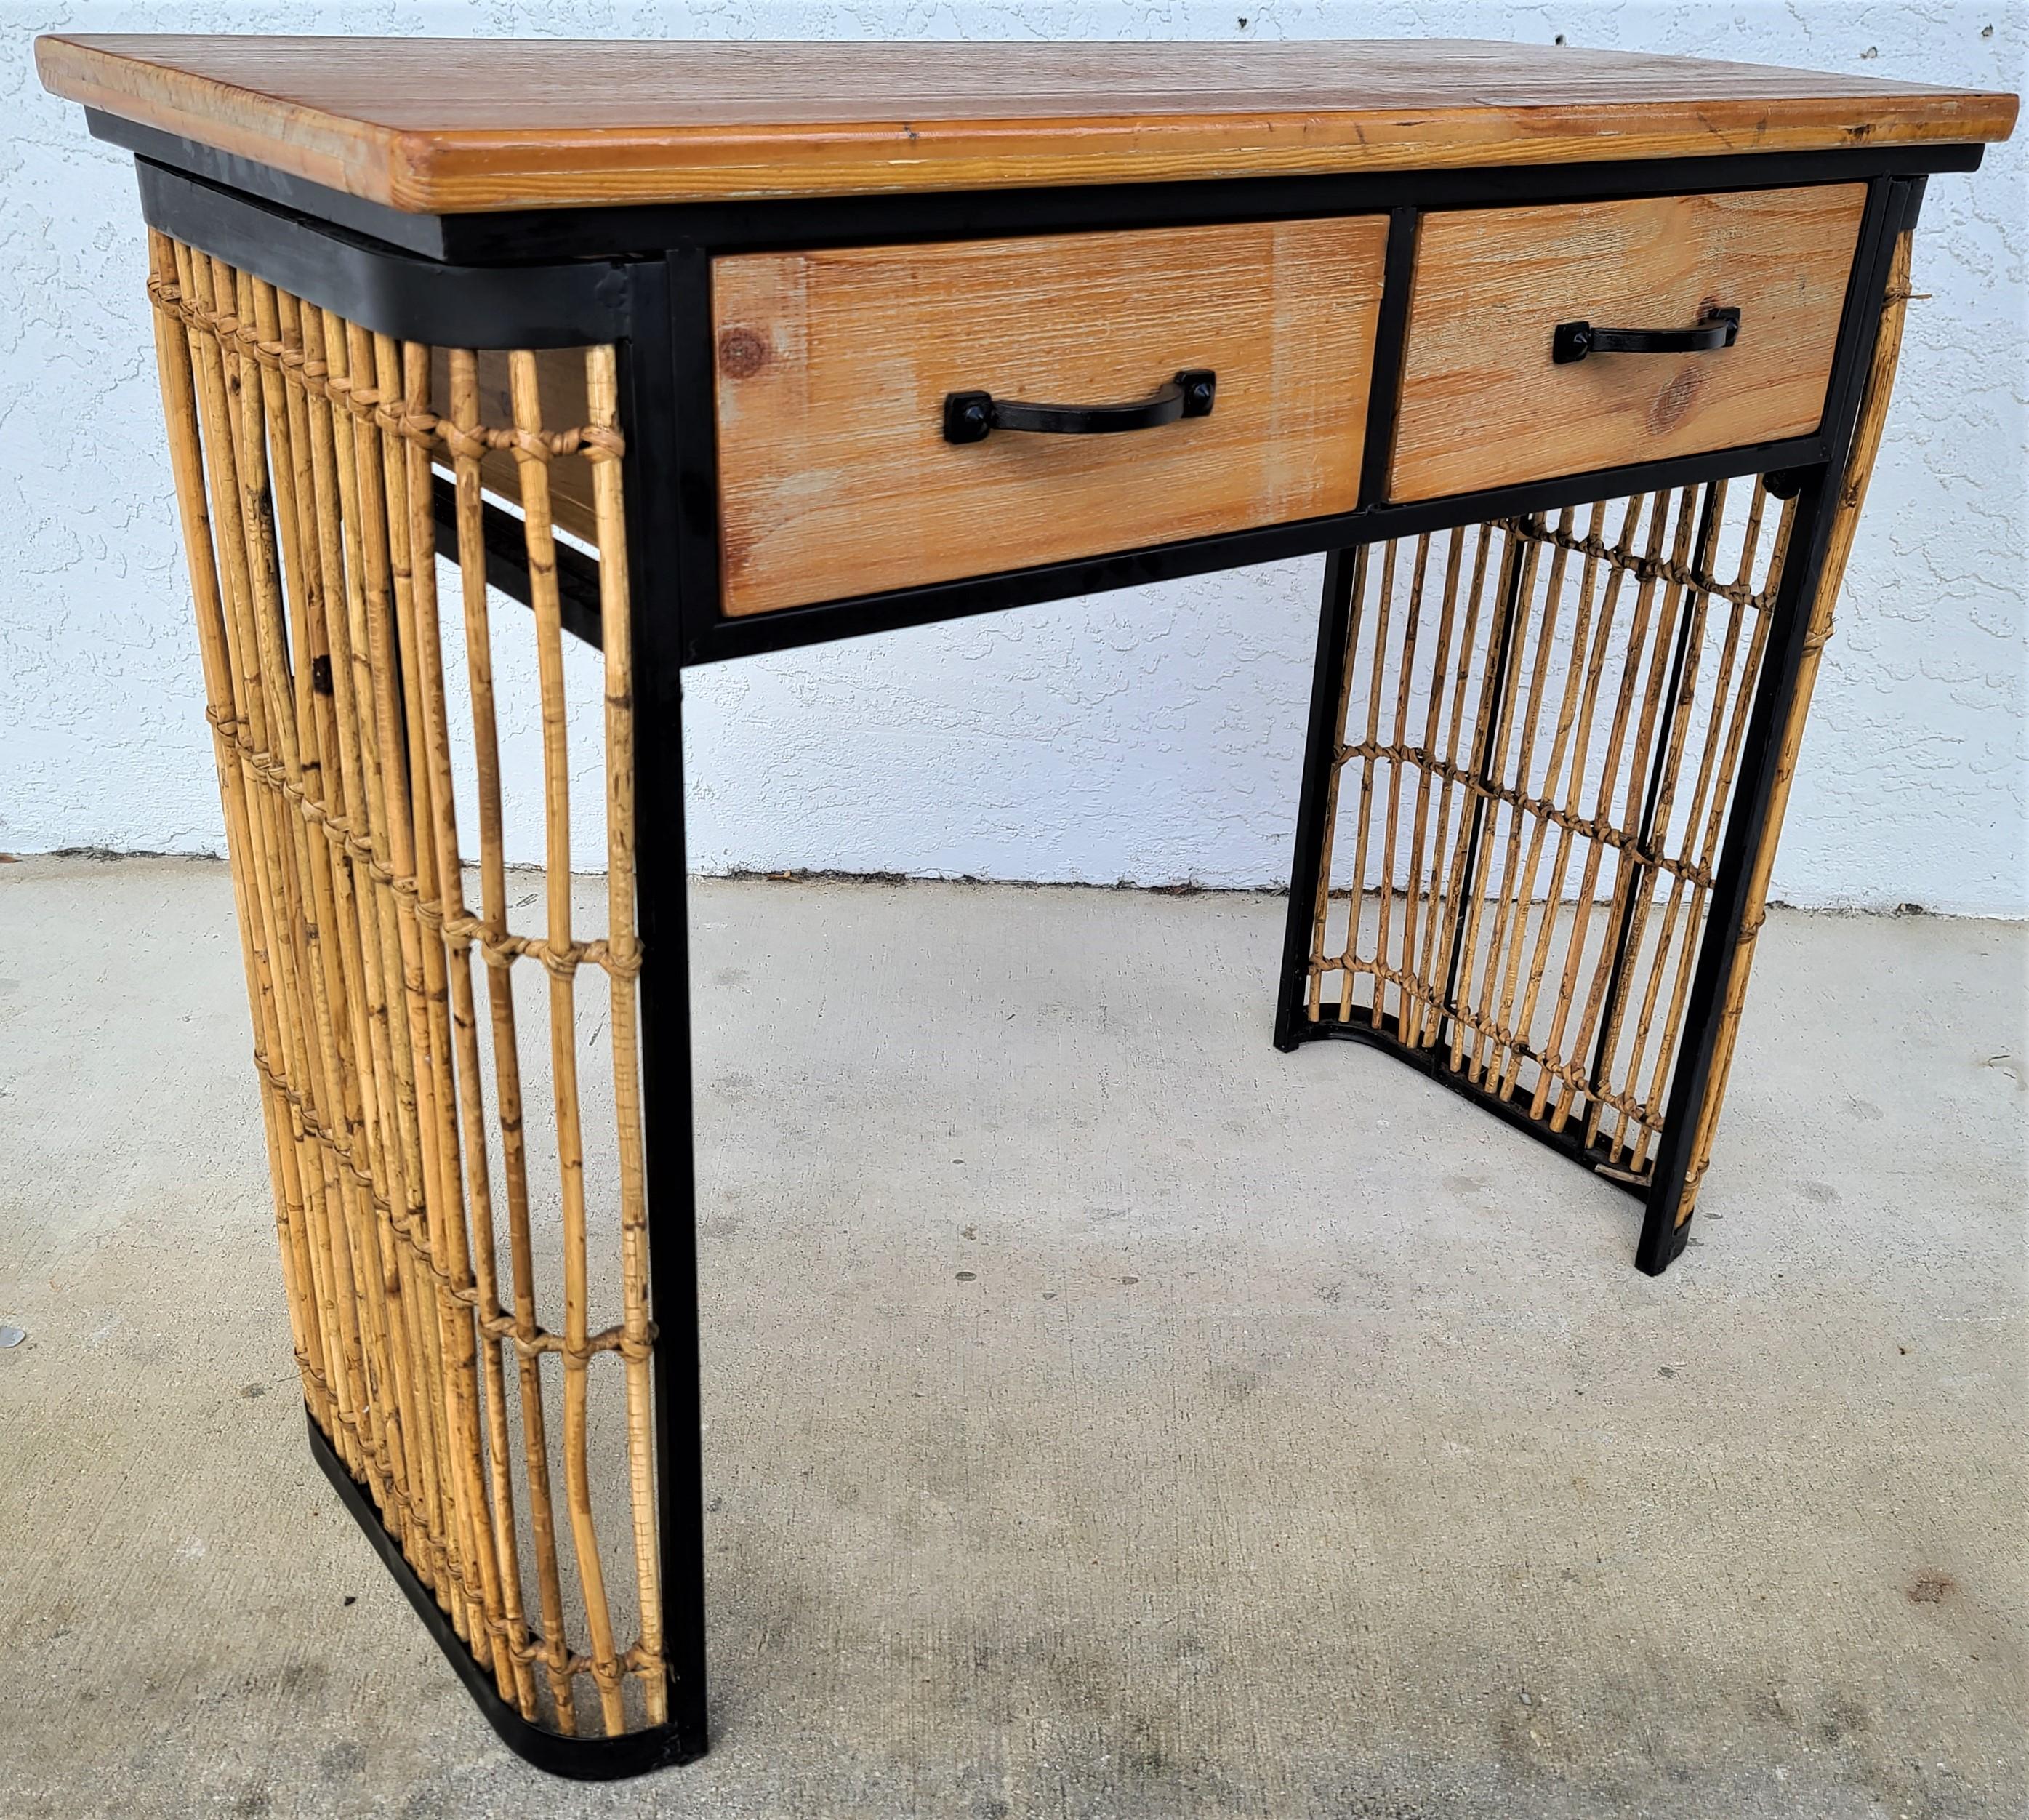 Offering One Of Our Recent Palm Beach Estate Fine Furniture Acquisitions Of A
MCM bamboo rattan wood and metal 2 drawer console sofa table

Approximate Measurements in Inches
30